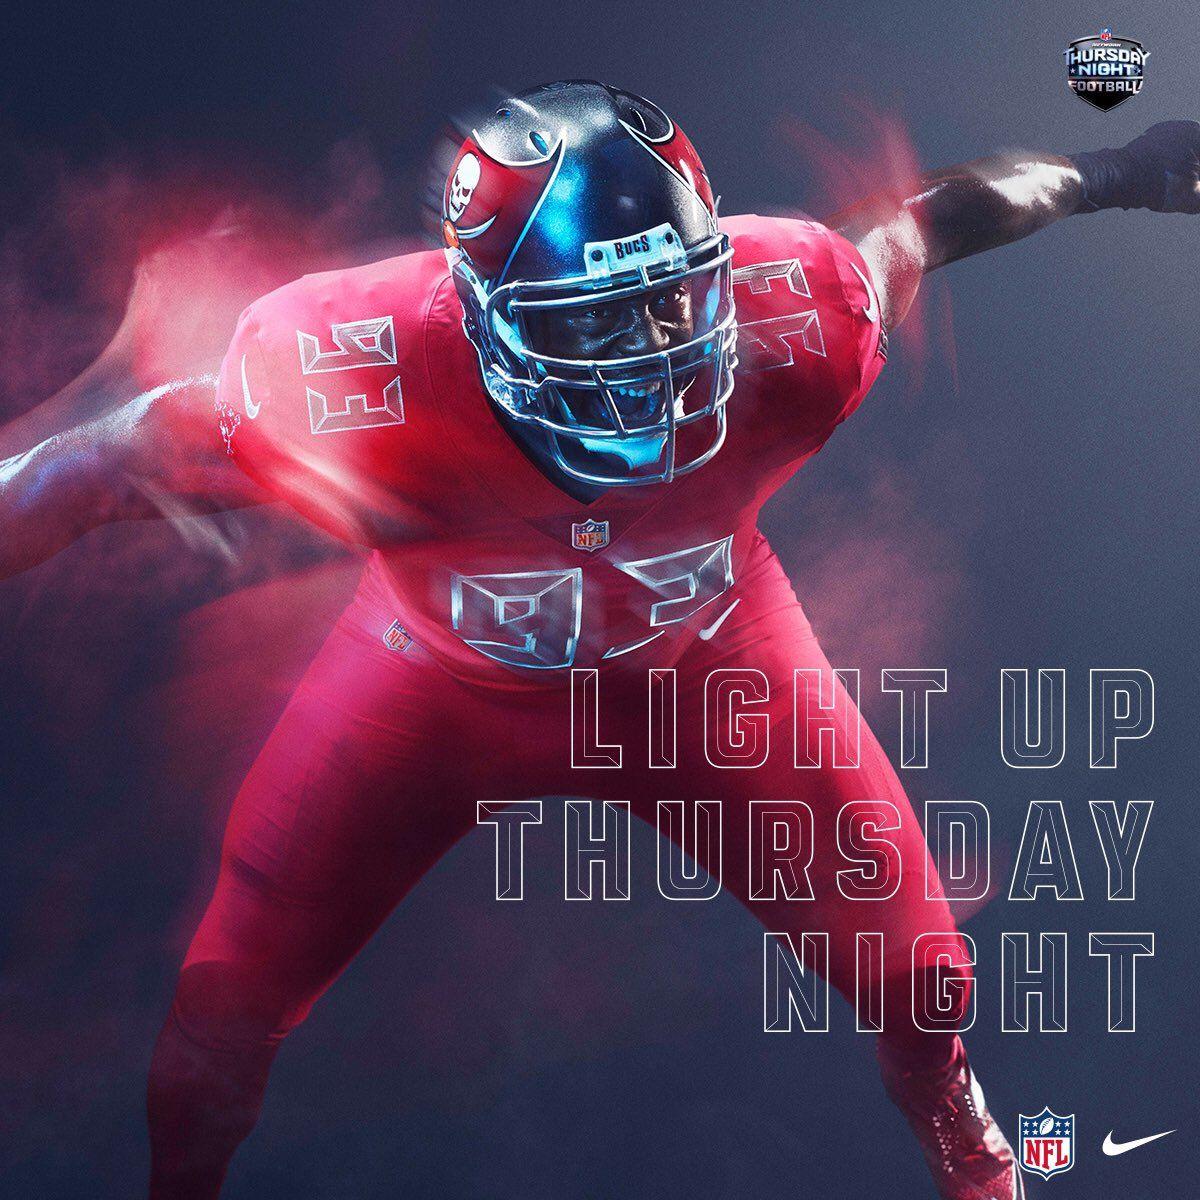 Ranking The NFL's Color Rush Uniforms, From Vomit Inducing